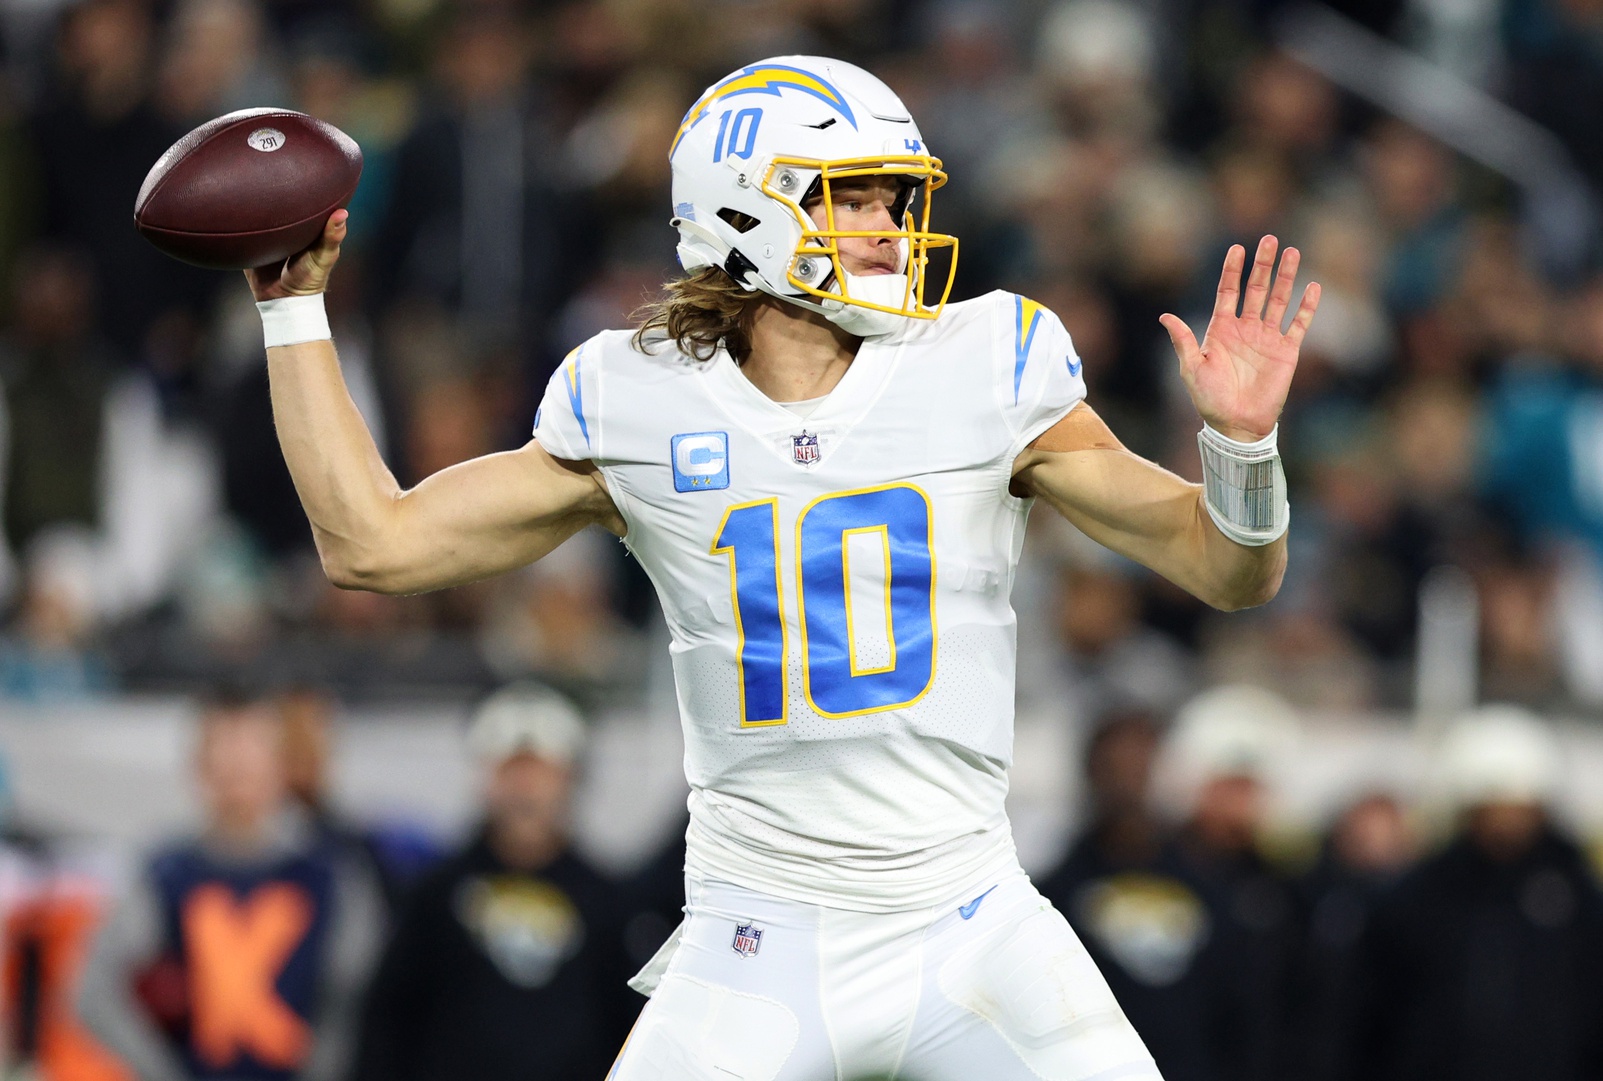 Los Angeles Chargers Schedule